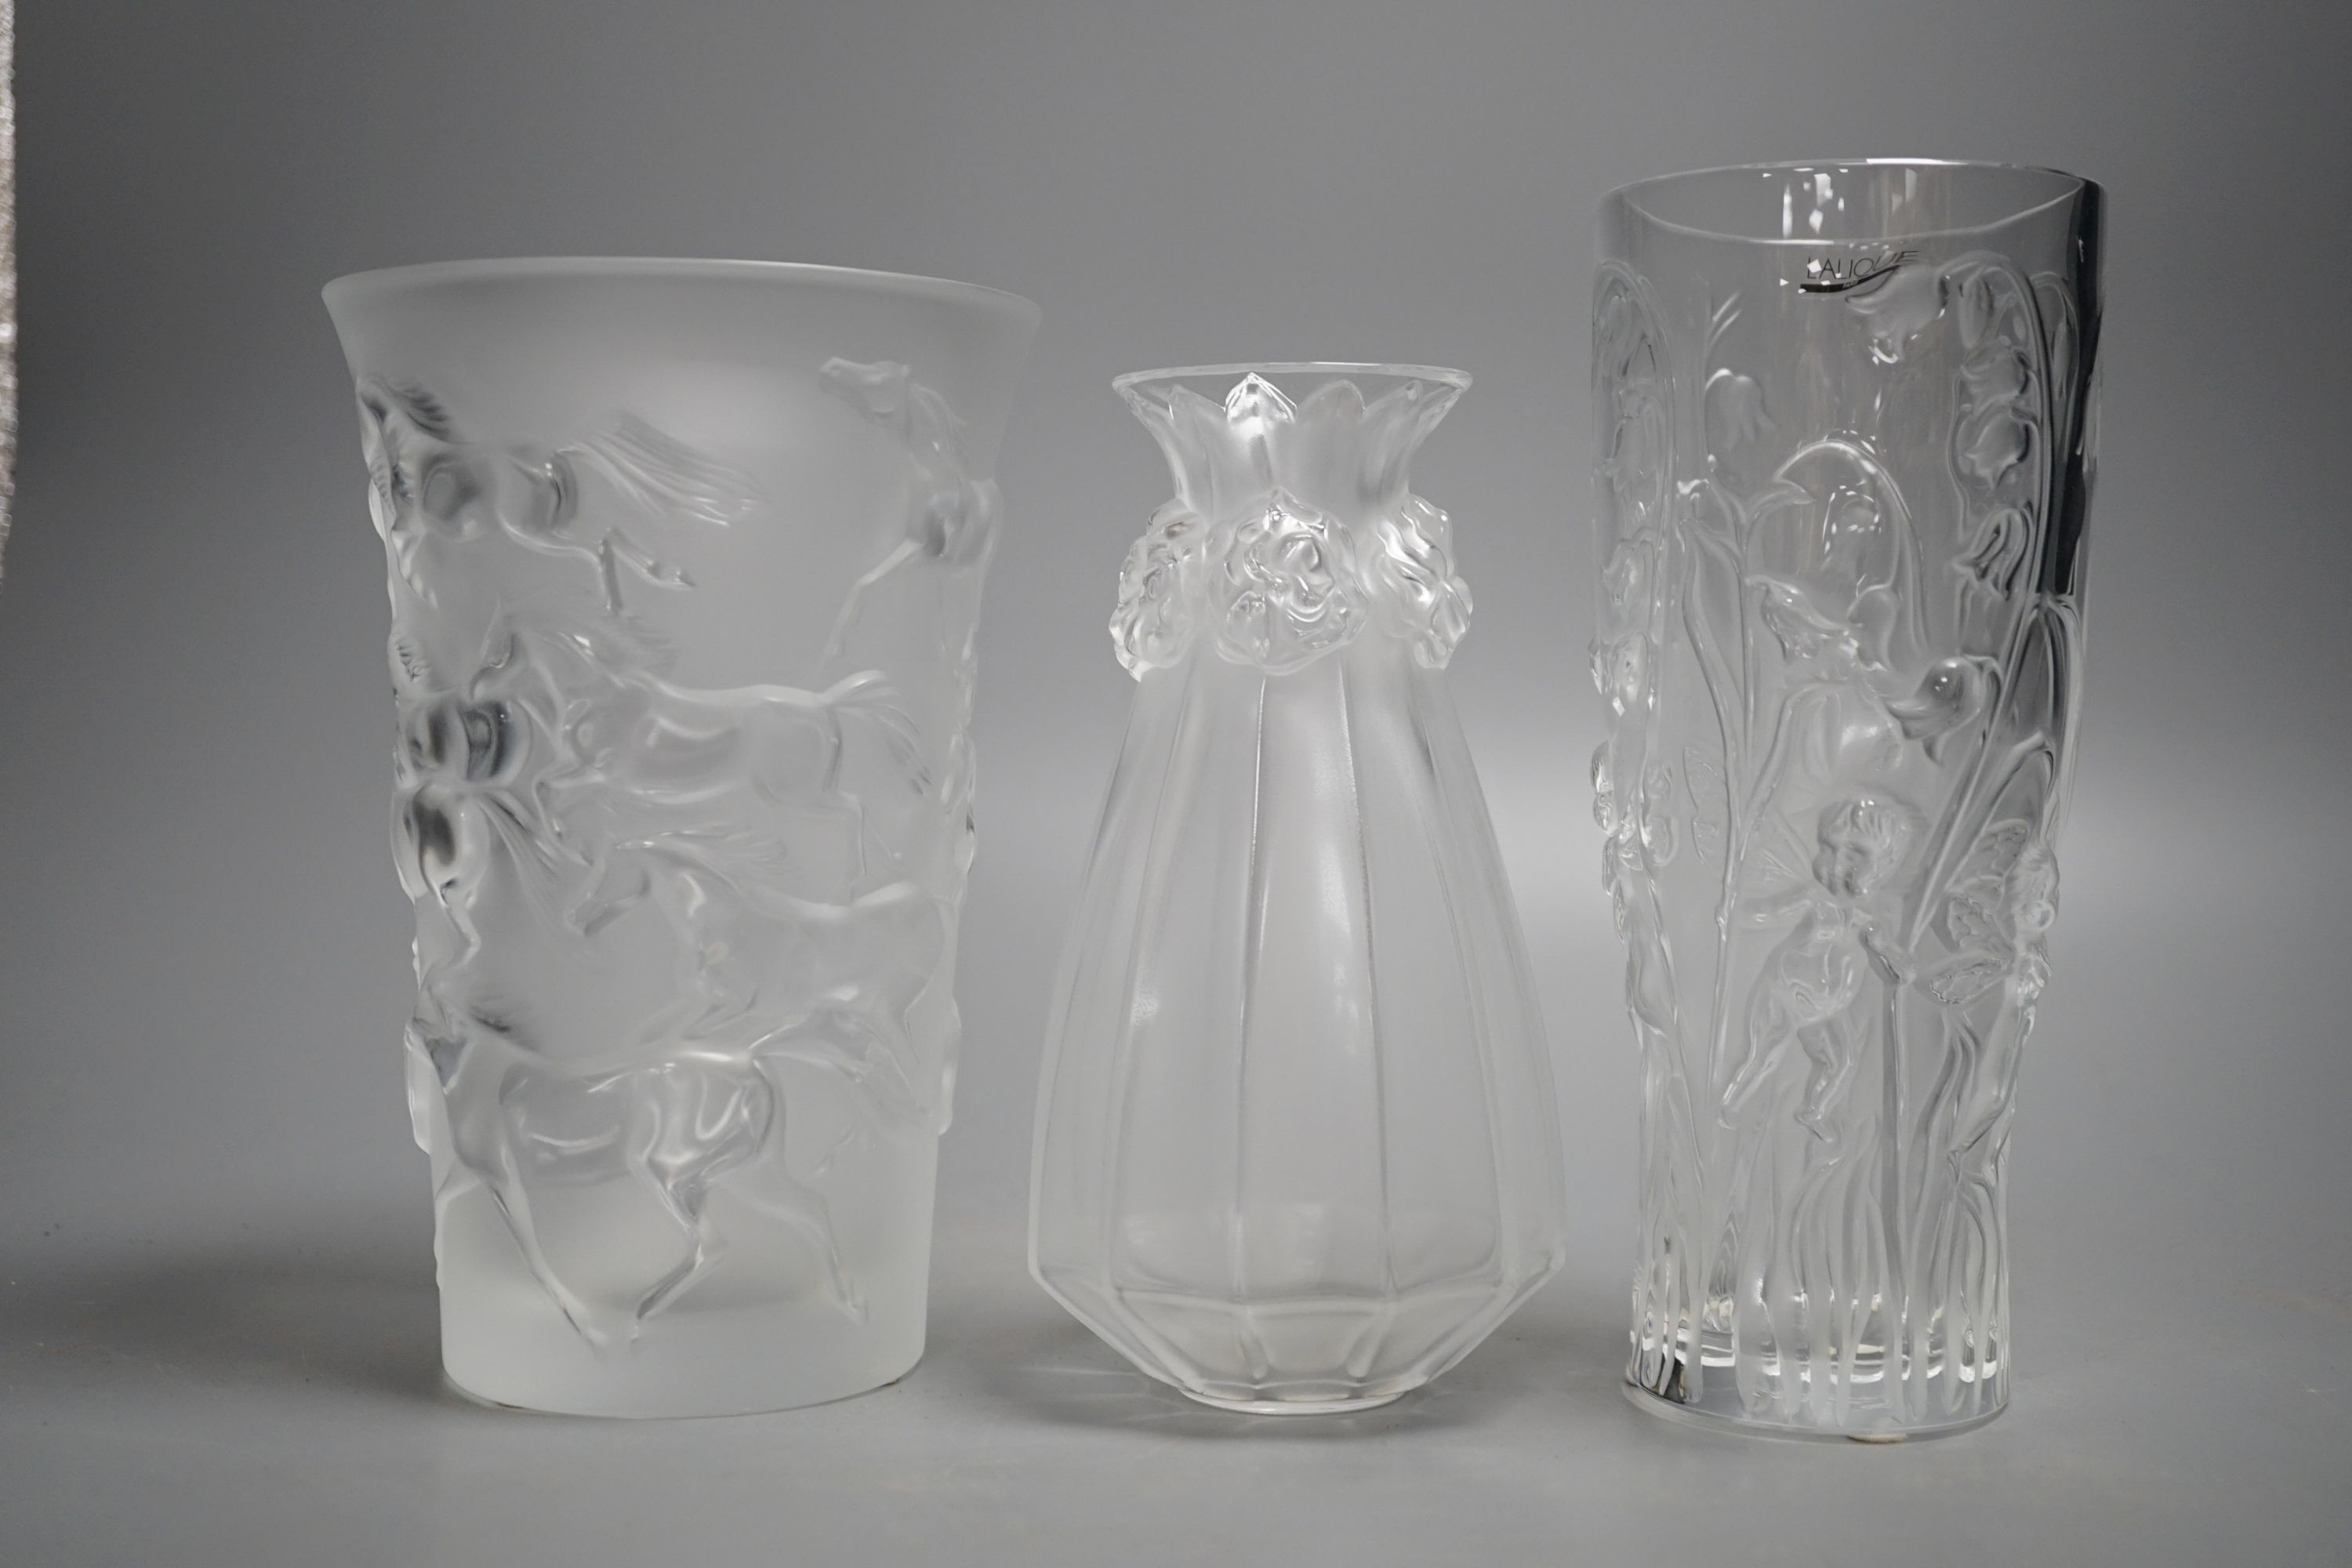 Three modern Lalique frosted glass vases - Oeillets (Carnations), Mustang and Elves pattern, tallest 20cm